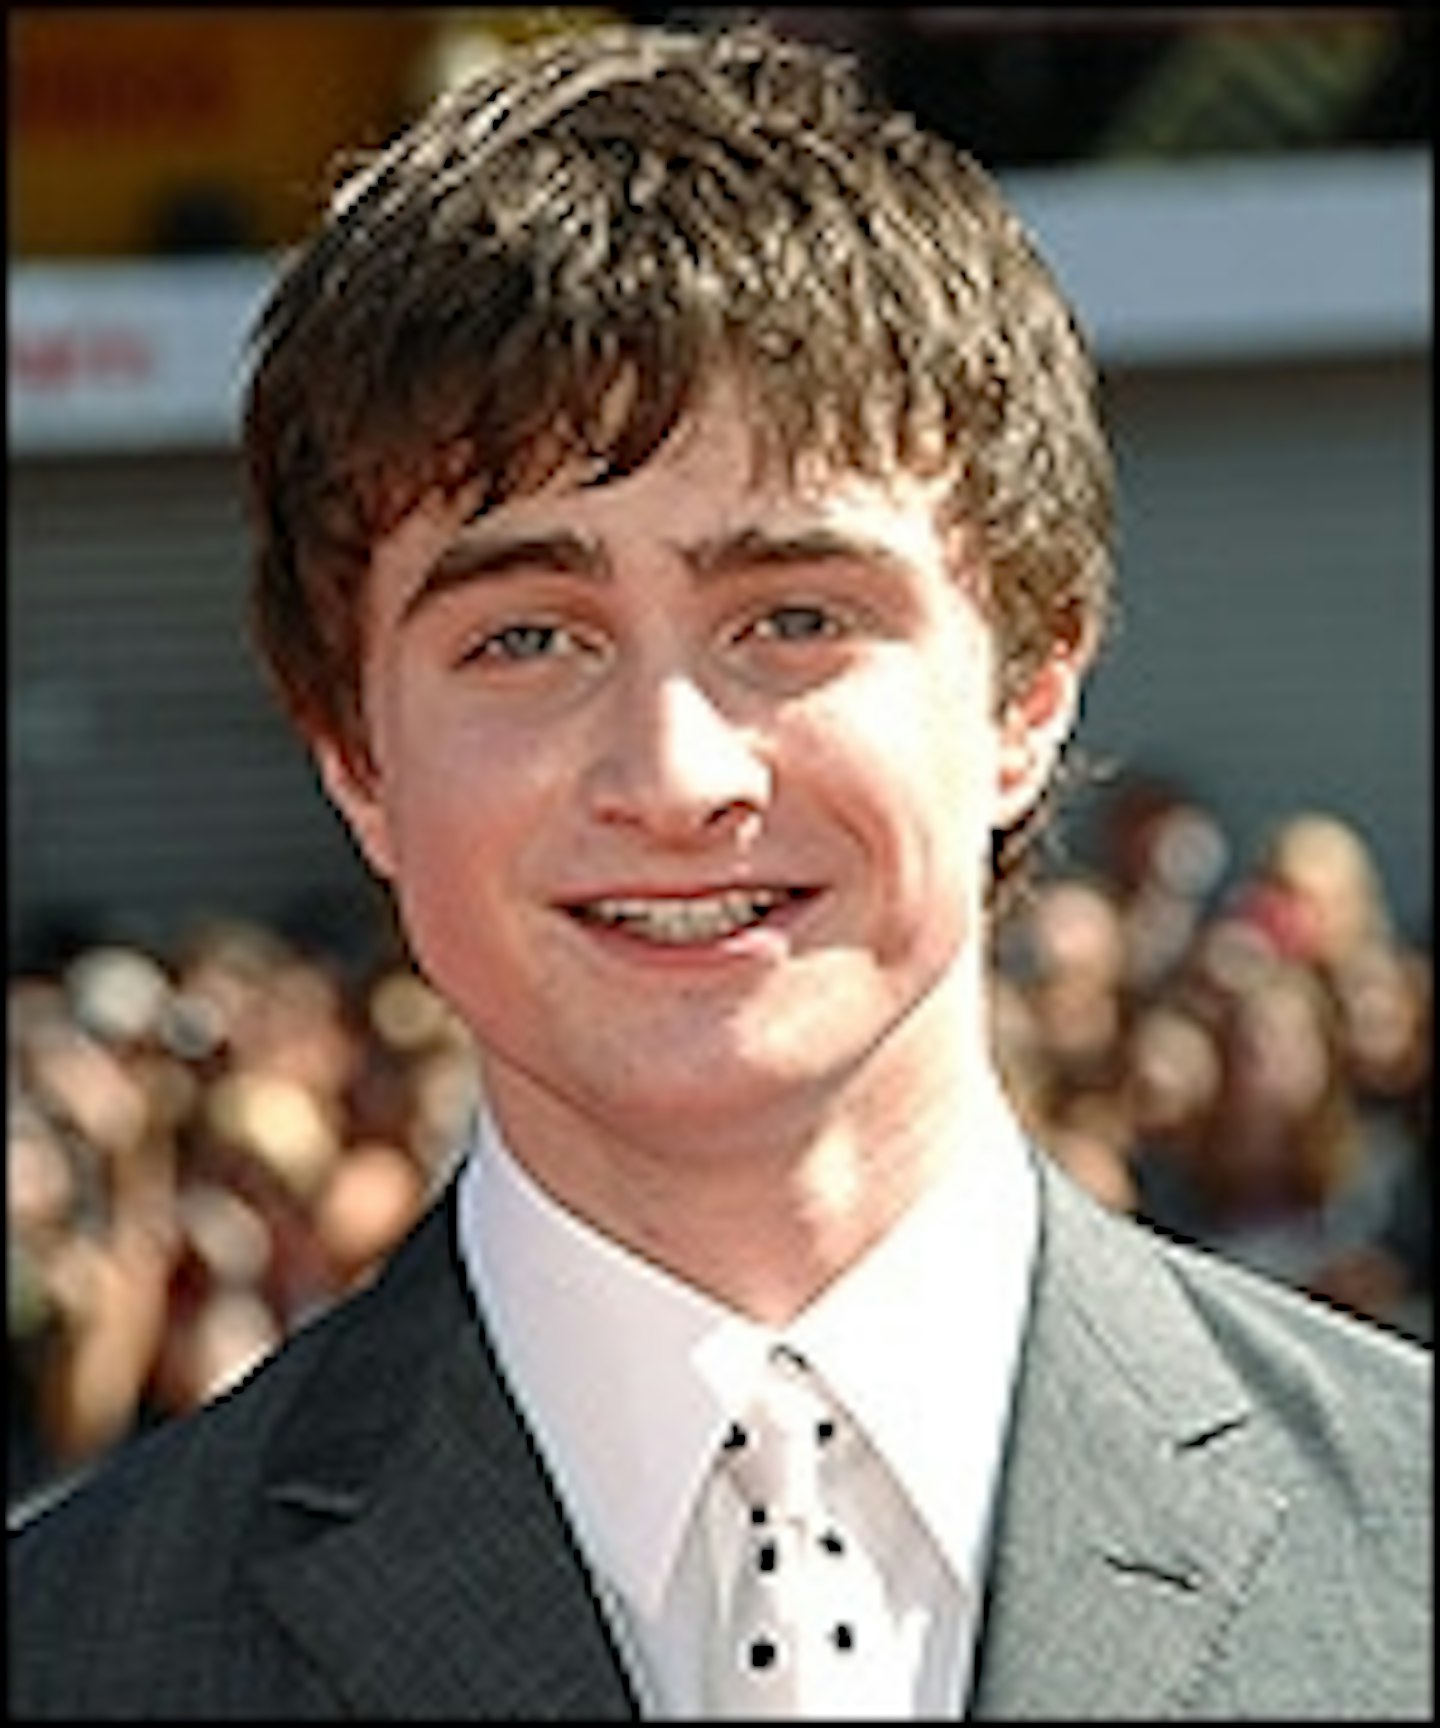 Daniel Radcliffe May Play Allen Ginsberg